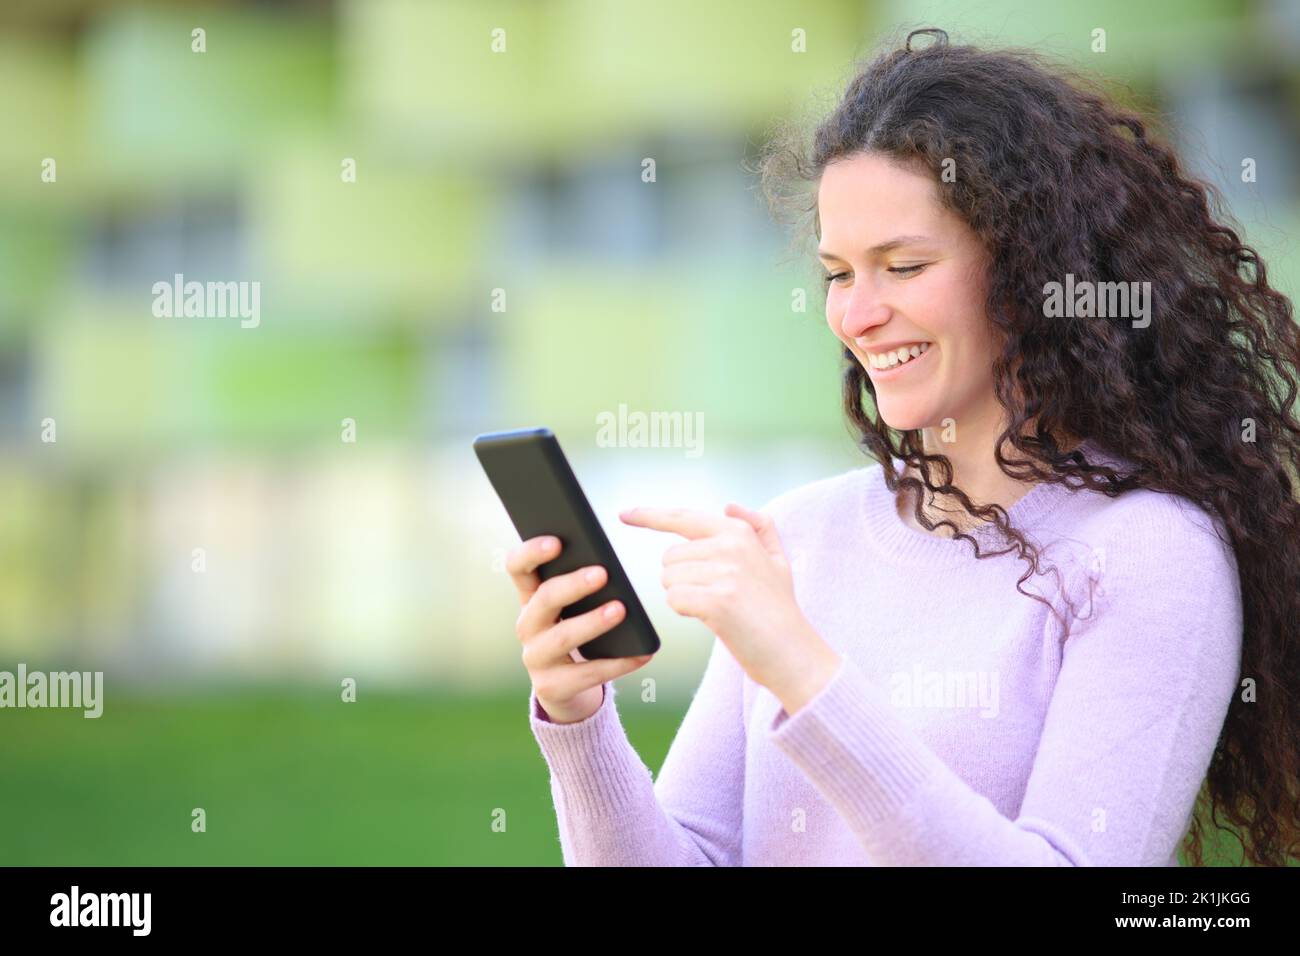 Happy woman with curly hair walks checking smart phone content in the street Stock Photo